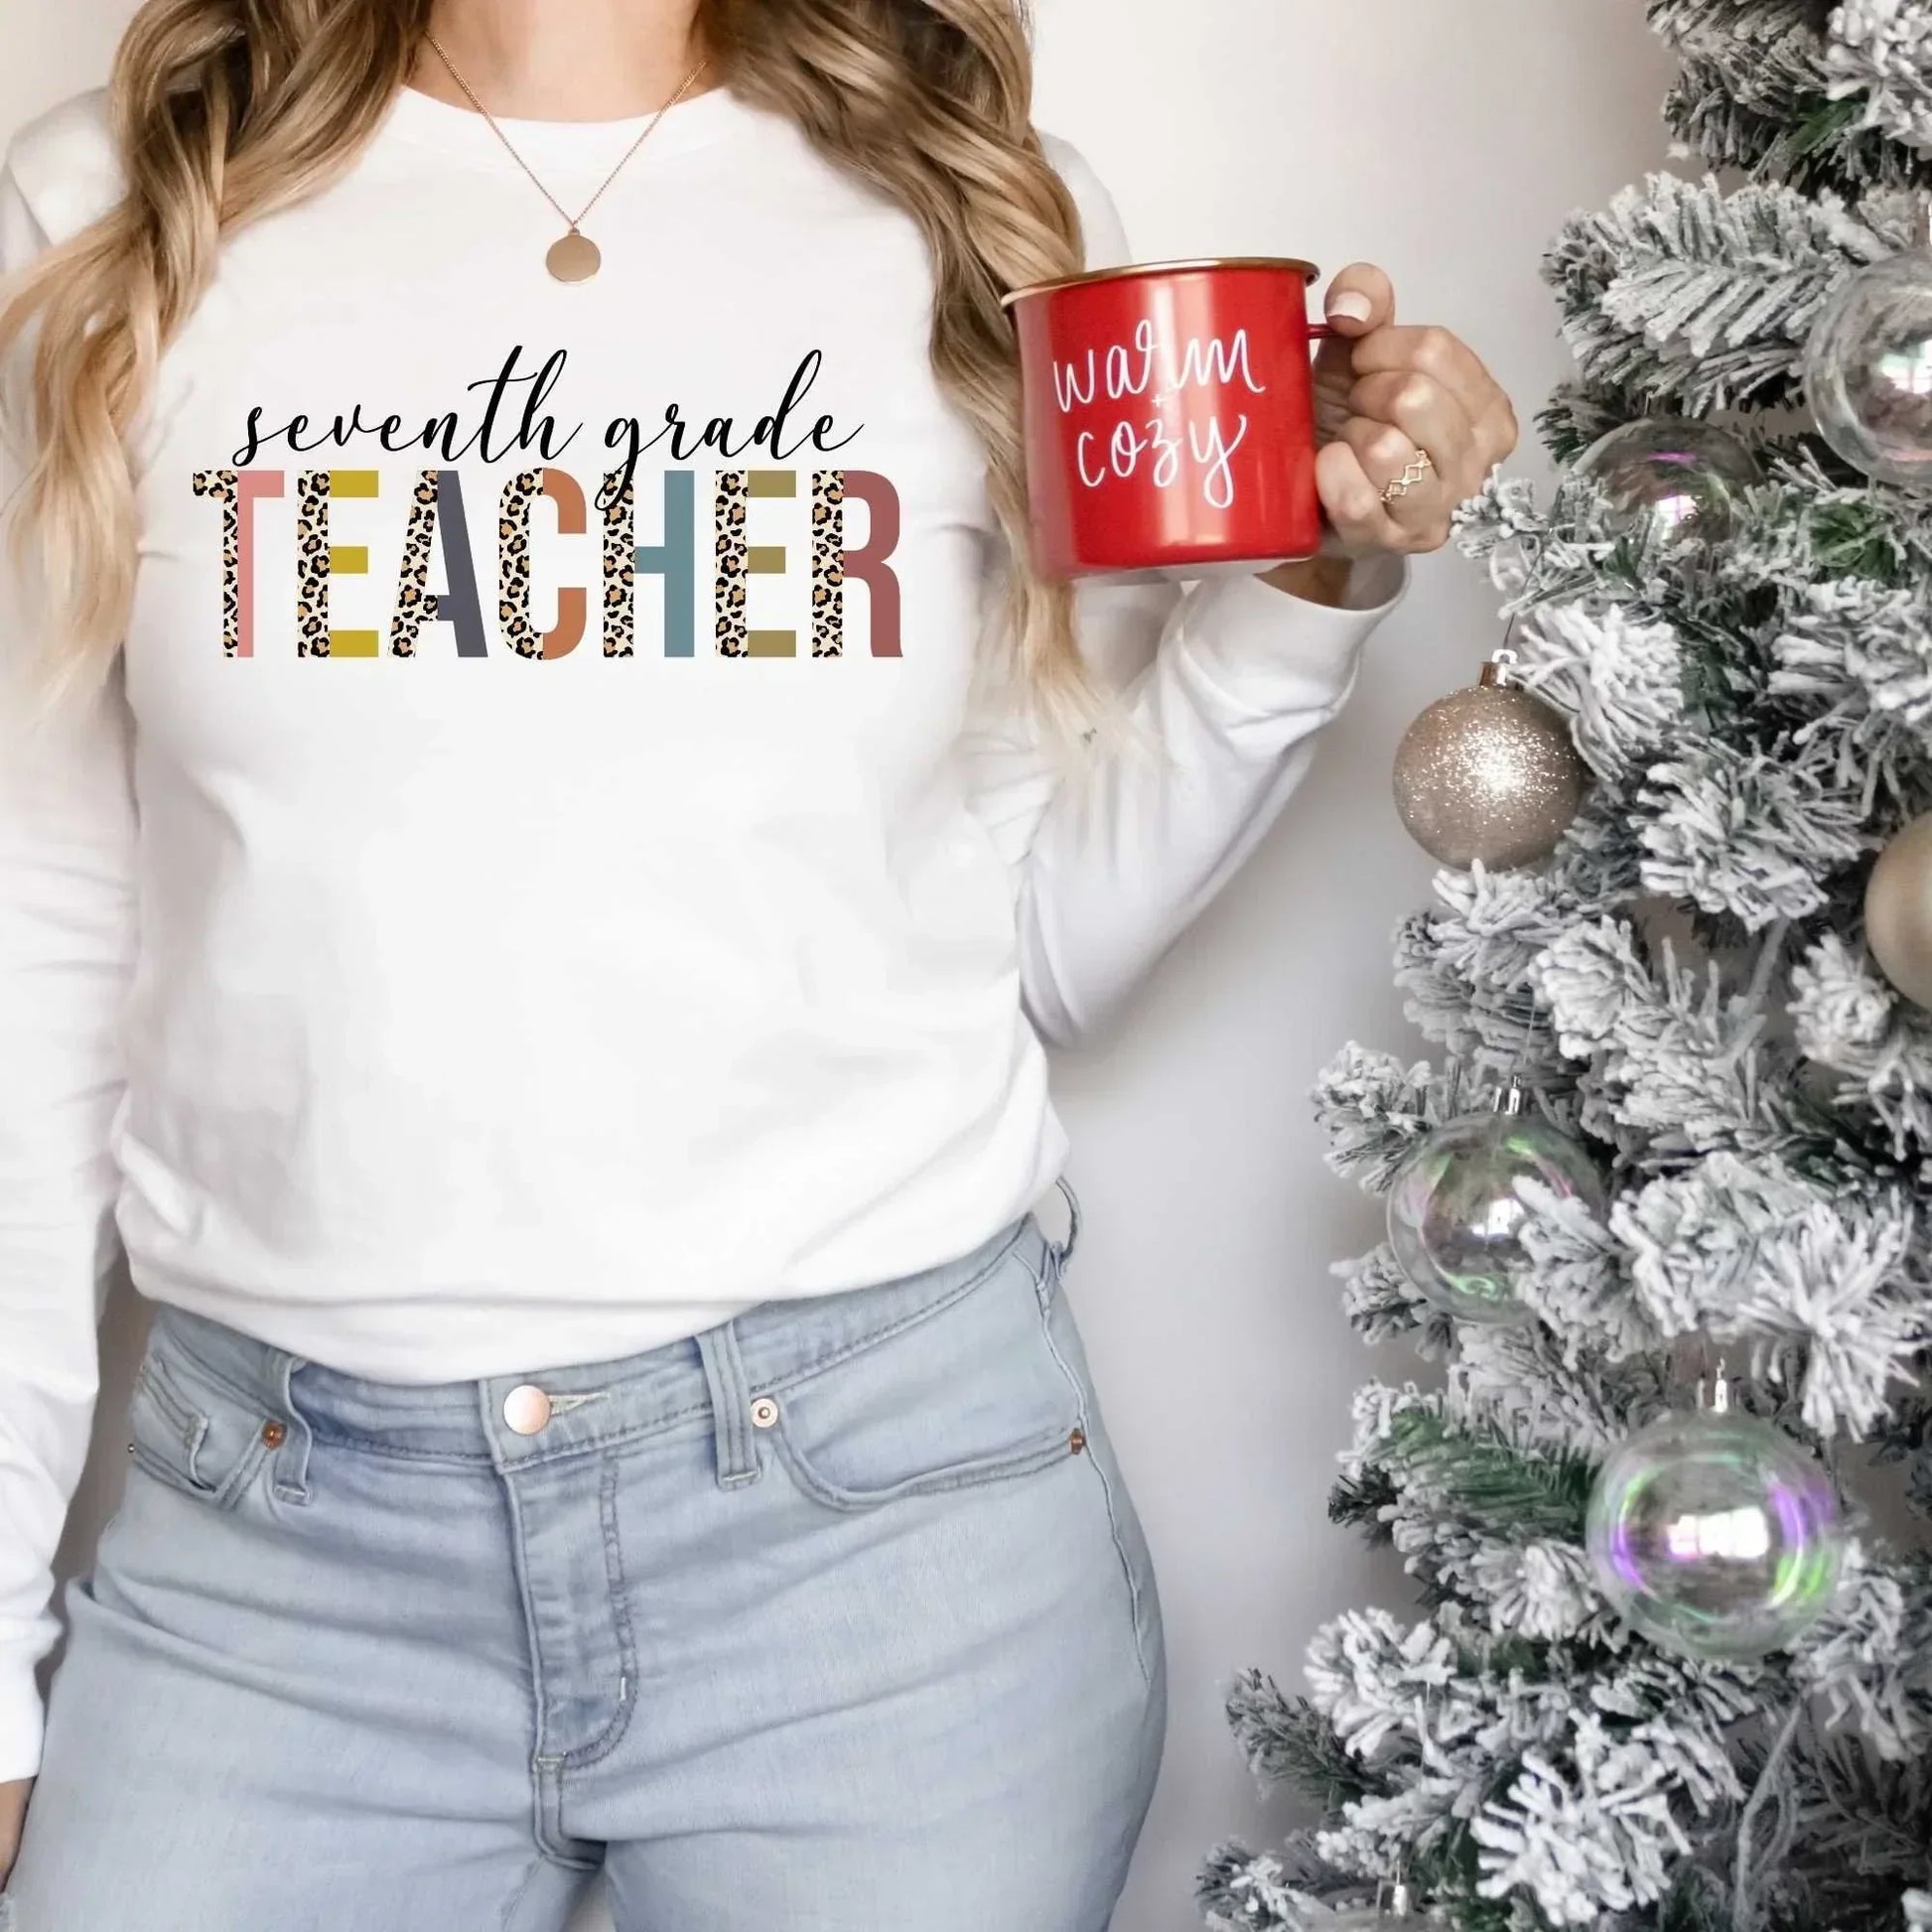 7th Grade Teacher Shirt | Great for New Middle School Team, Appreciation Gifts, Back to School, Holiday Celebration, Christmas Presents Gift HMDesignStudioUS